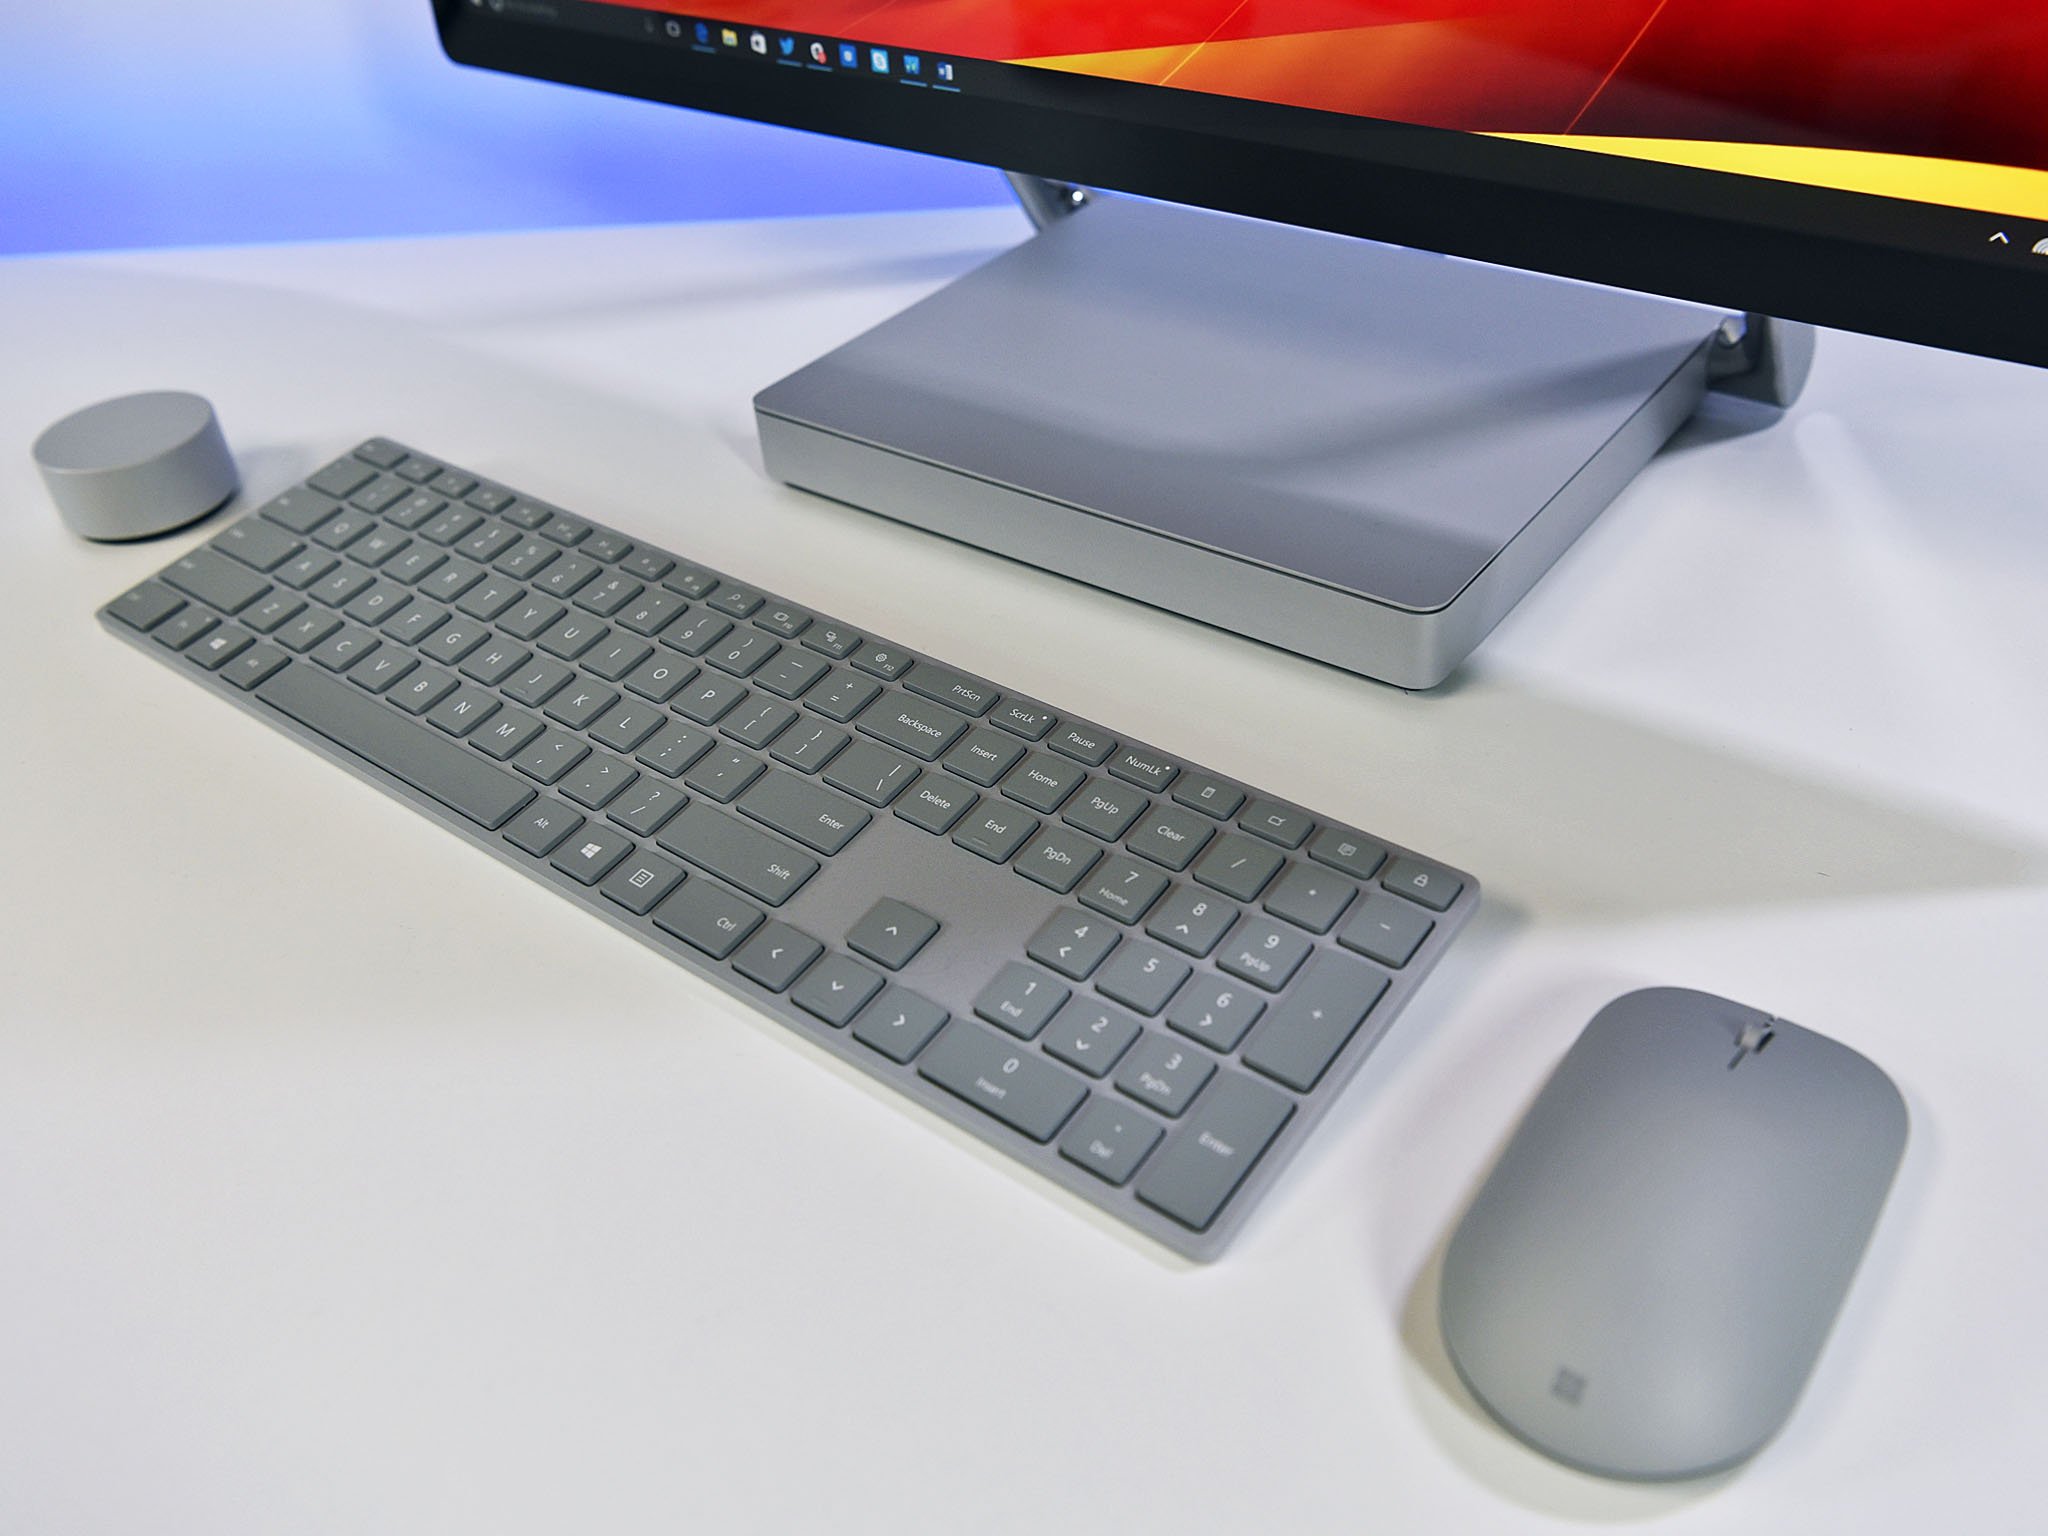 Why Microsoft brands some accessories for Surface but not others 